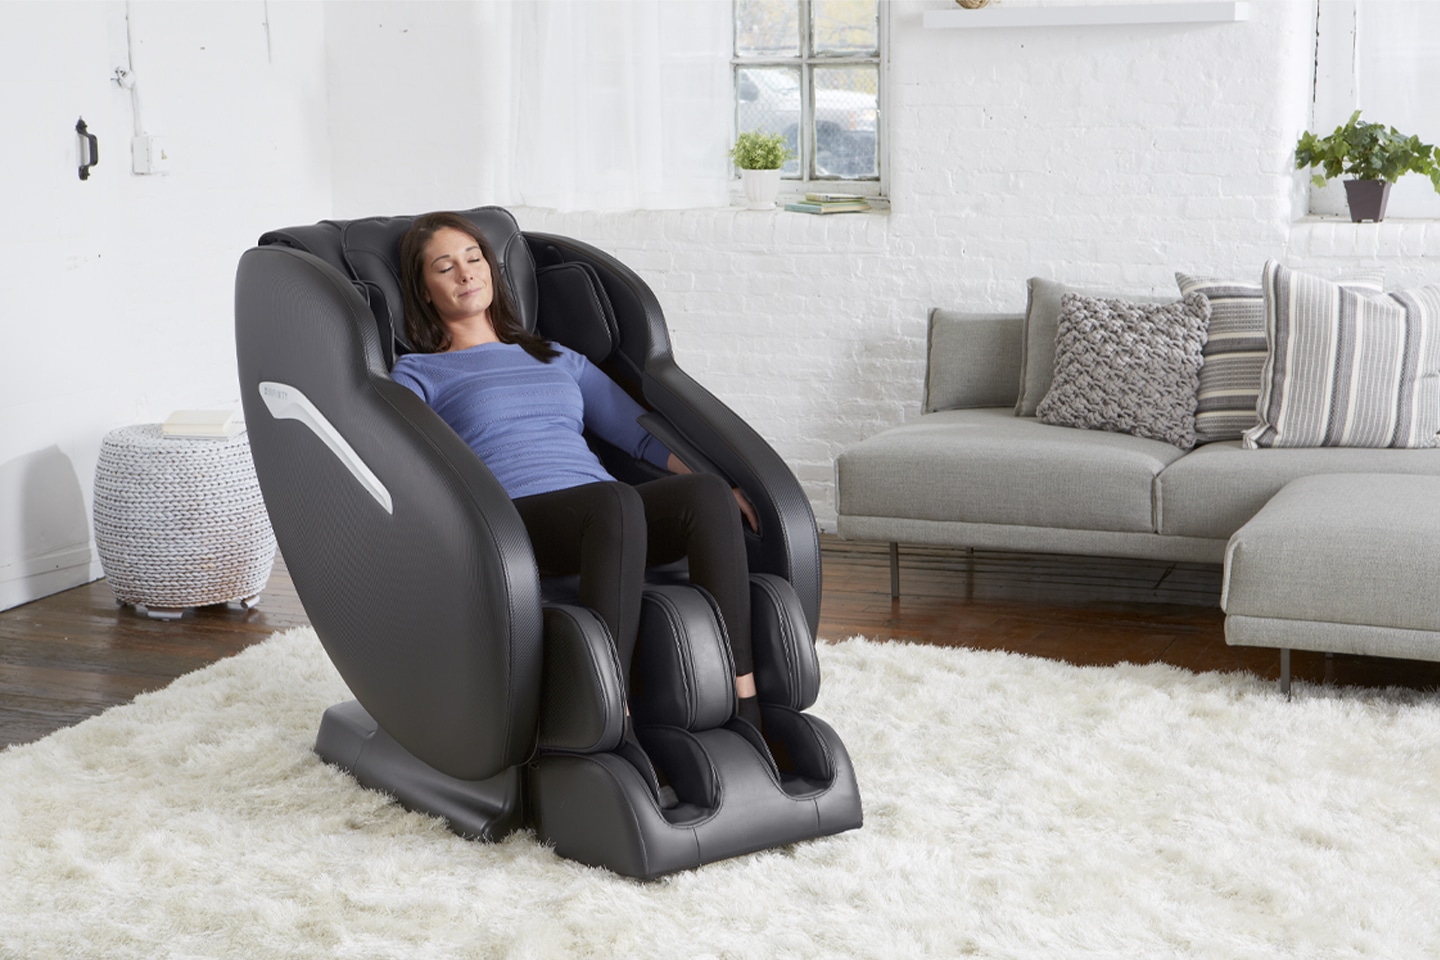 women enjoys her massage chair in the comfort of her home